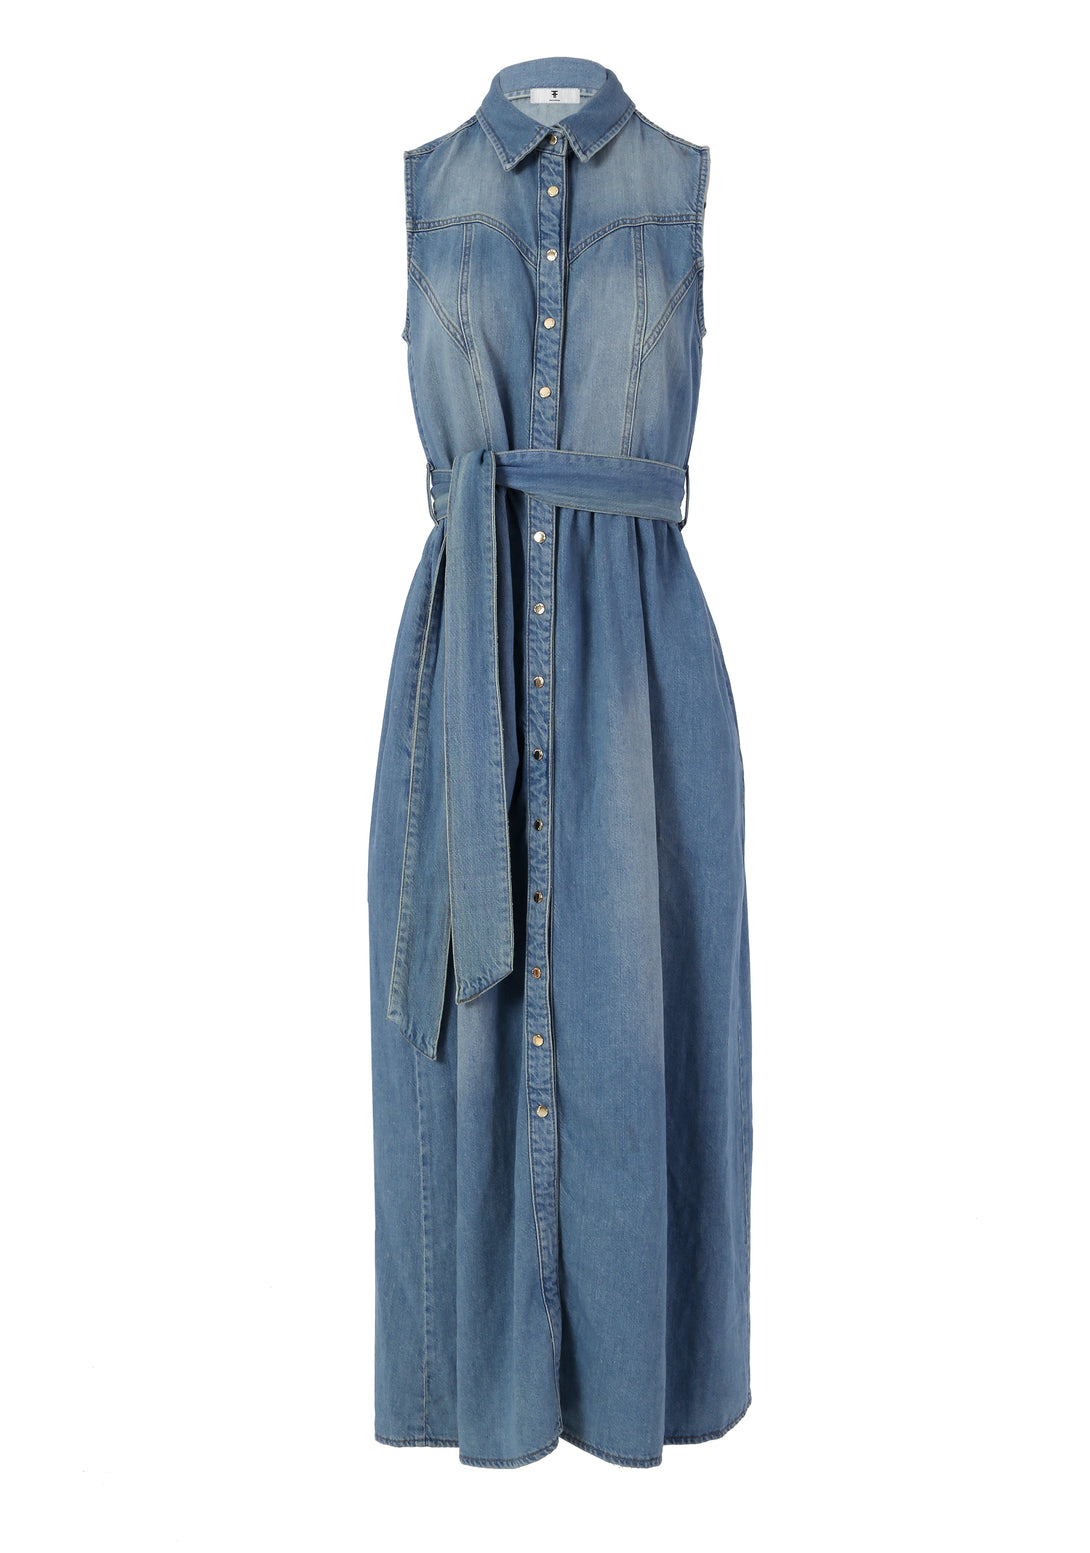 Long sleeveless dress made in denim with light wash